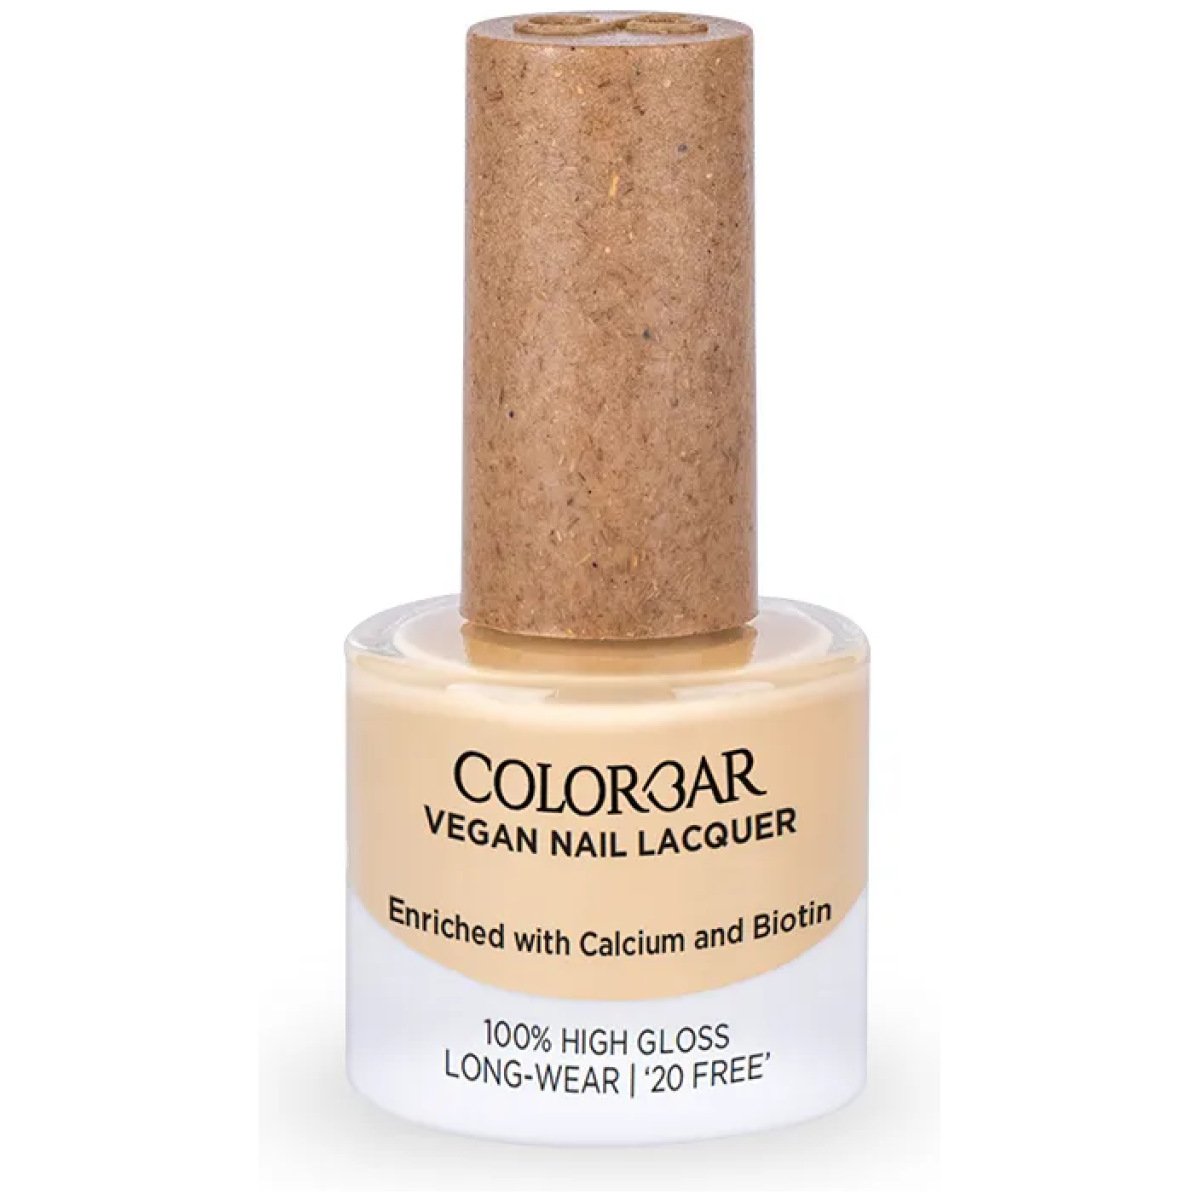 Buy Colorbar Nail Lacquer, Sheer Finish, Tennis, 12 Ml Online at Low Prices  in India - Amazon.in